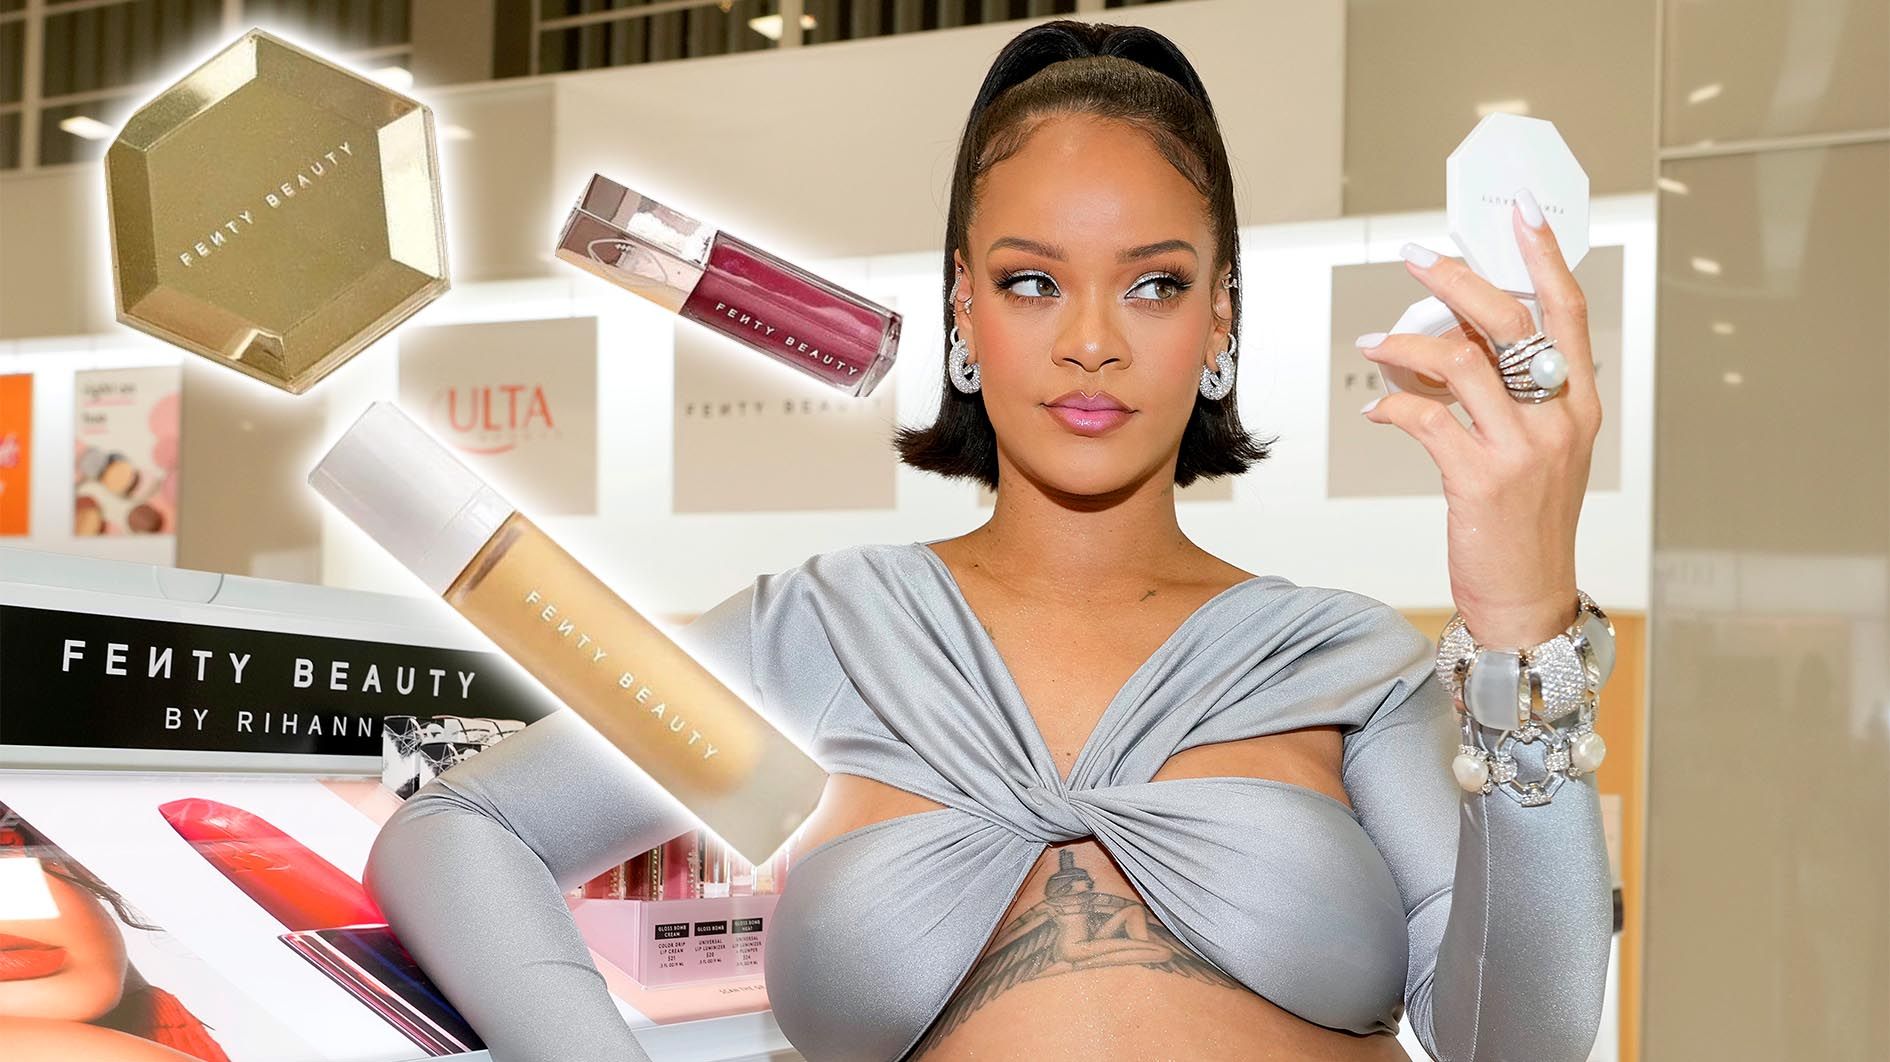 It's Been 5 Years Since Fenty Beauty Launched